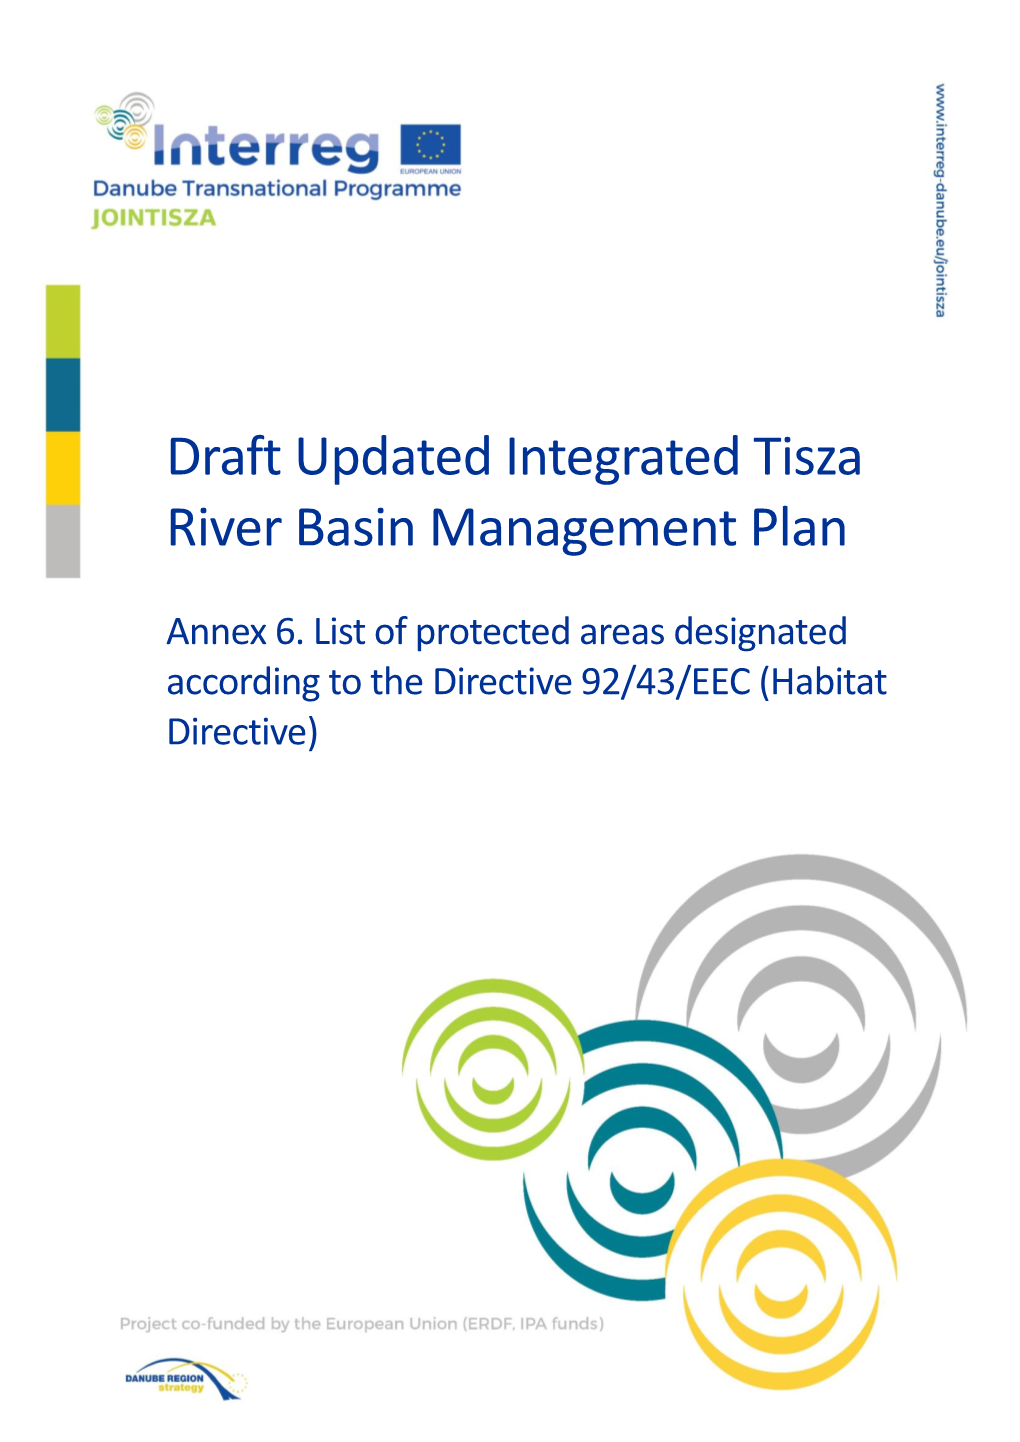 Draft Updated Integrated Tisza River Basin Management Plan